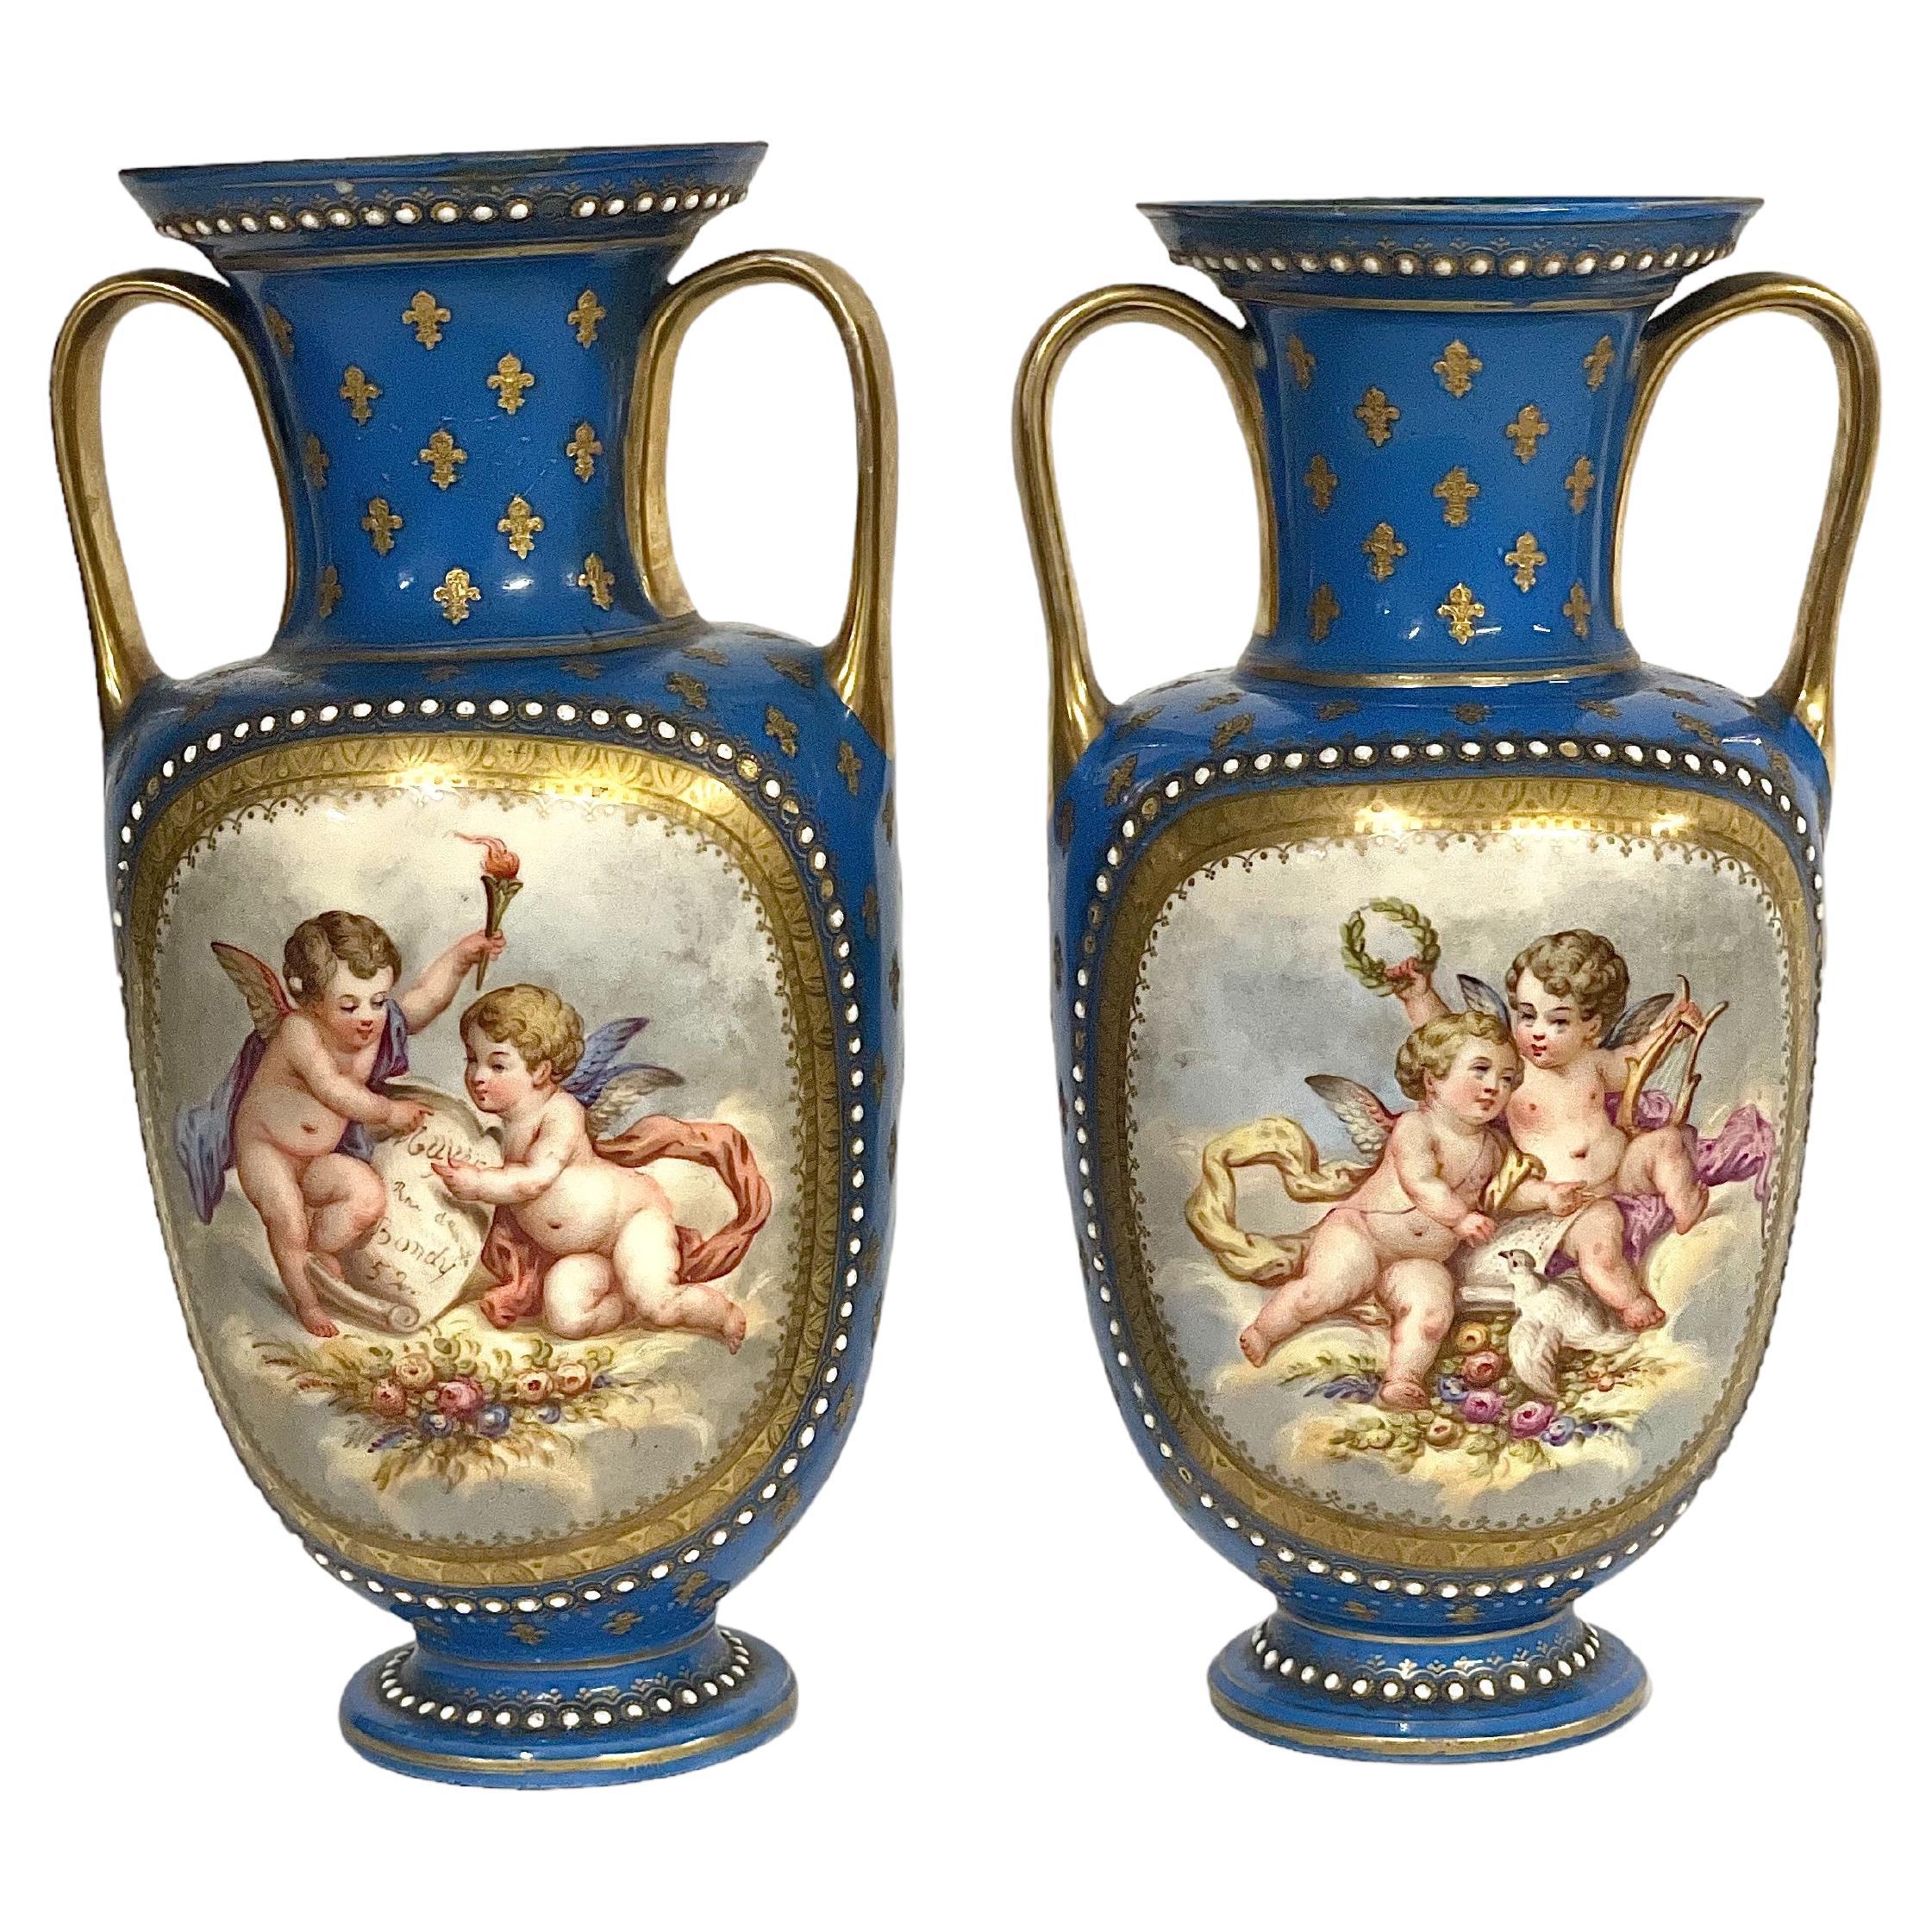 Sèvres Pair of Gilded and Blue Porcelain Vases, 19th Century